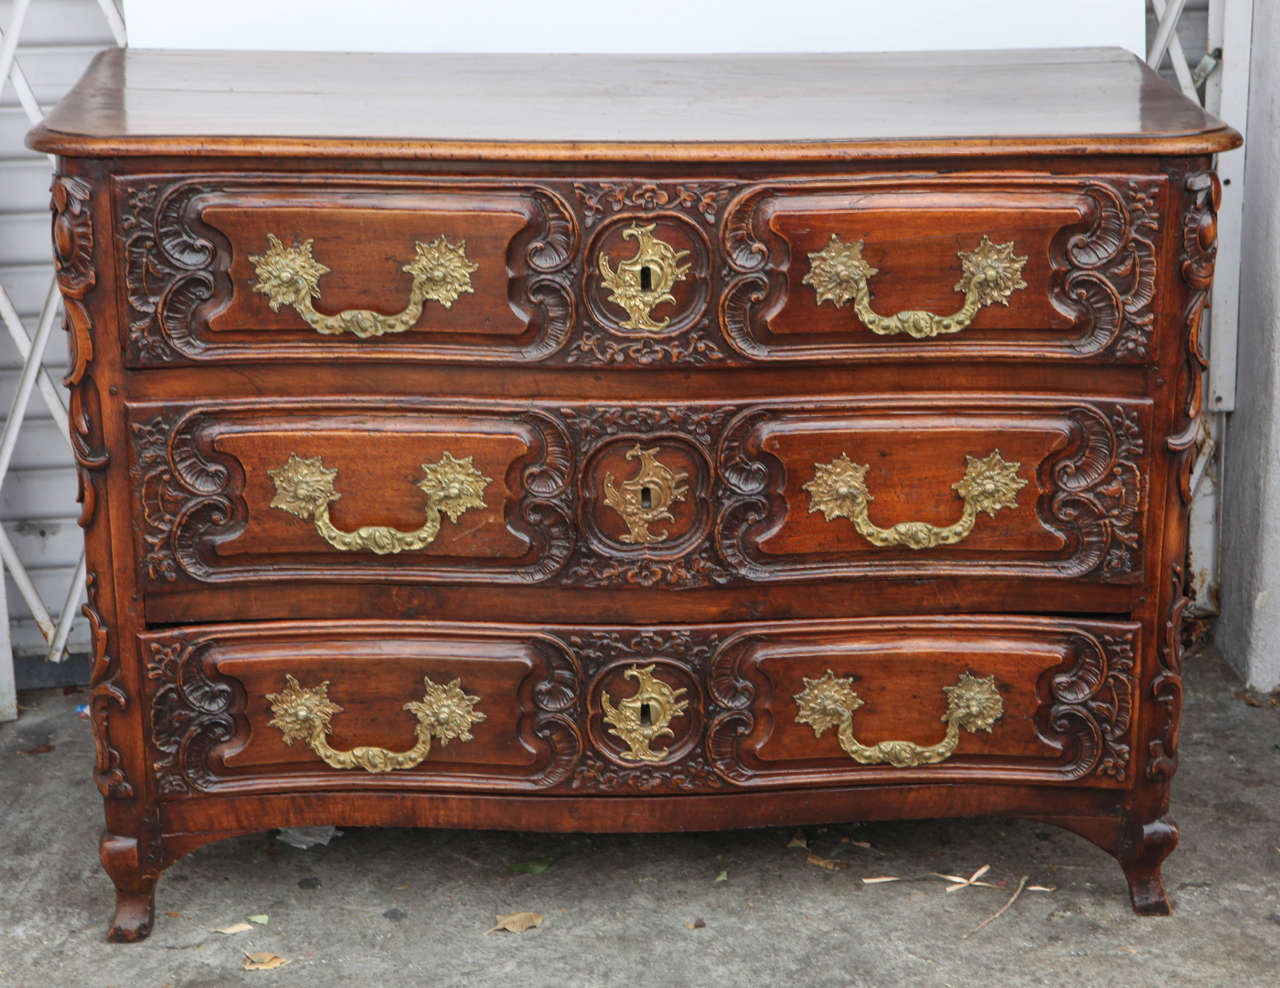 18th century French Louis XV style finely carved walnut three-drawer commode with bronze hardware. Lyon, France.